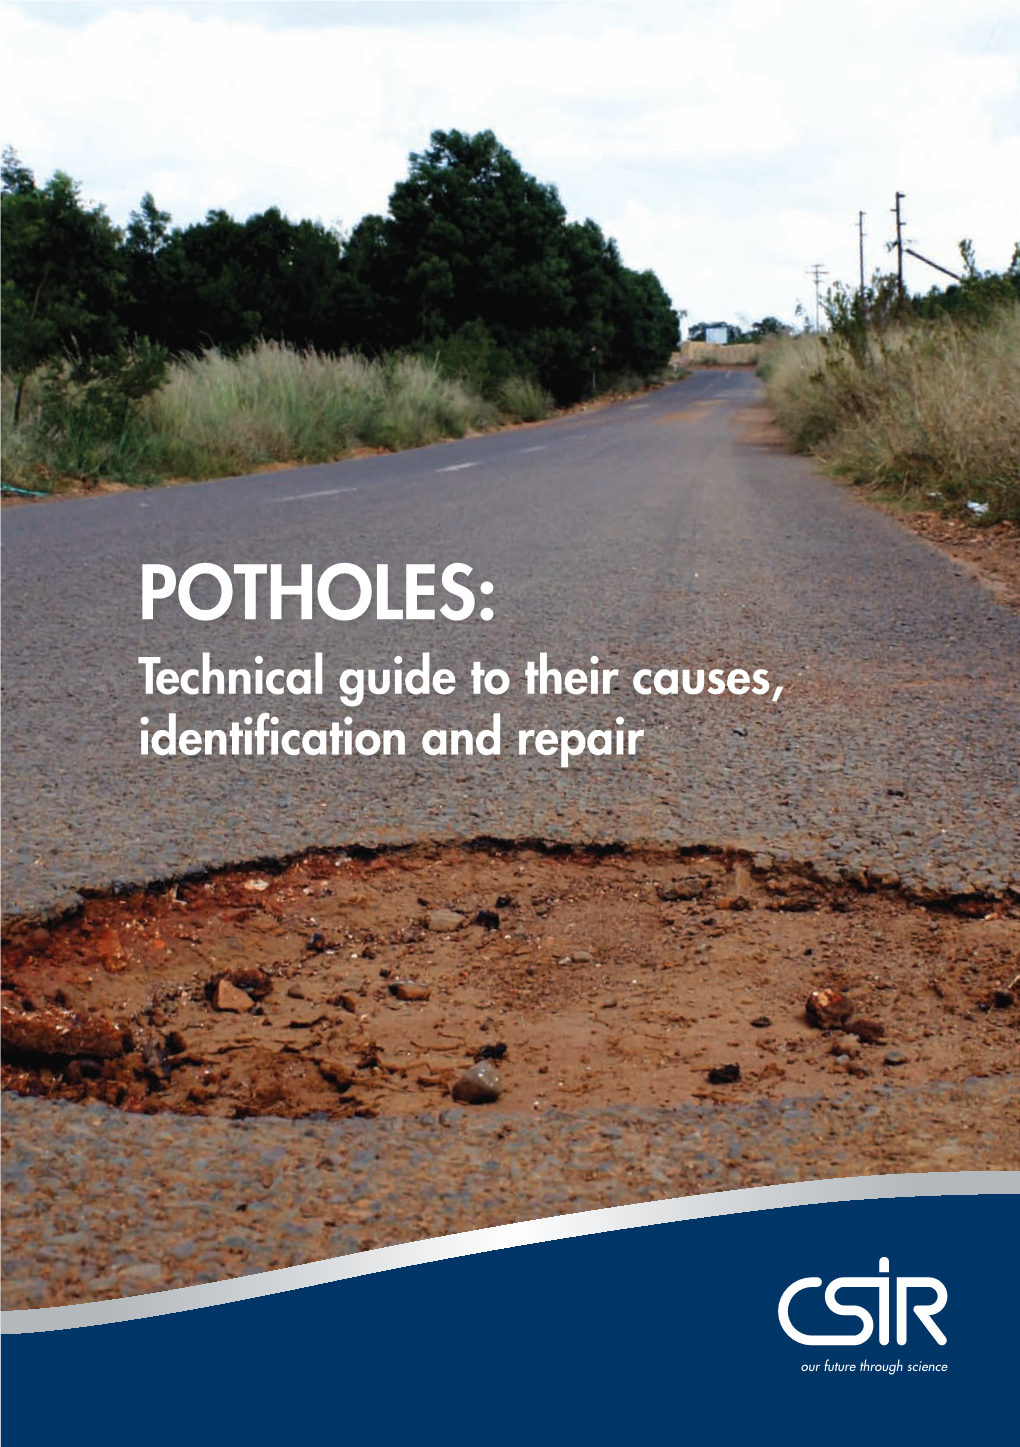 POTHOLES: Technical Guide to Their Causes, Identification and Repair POTHOLES: a Technical Guide to Their Causes, Identification and Repair